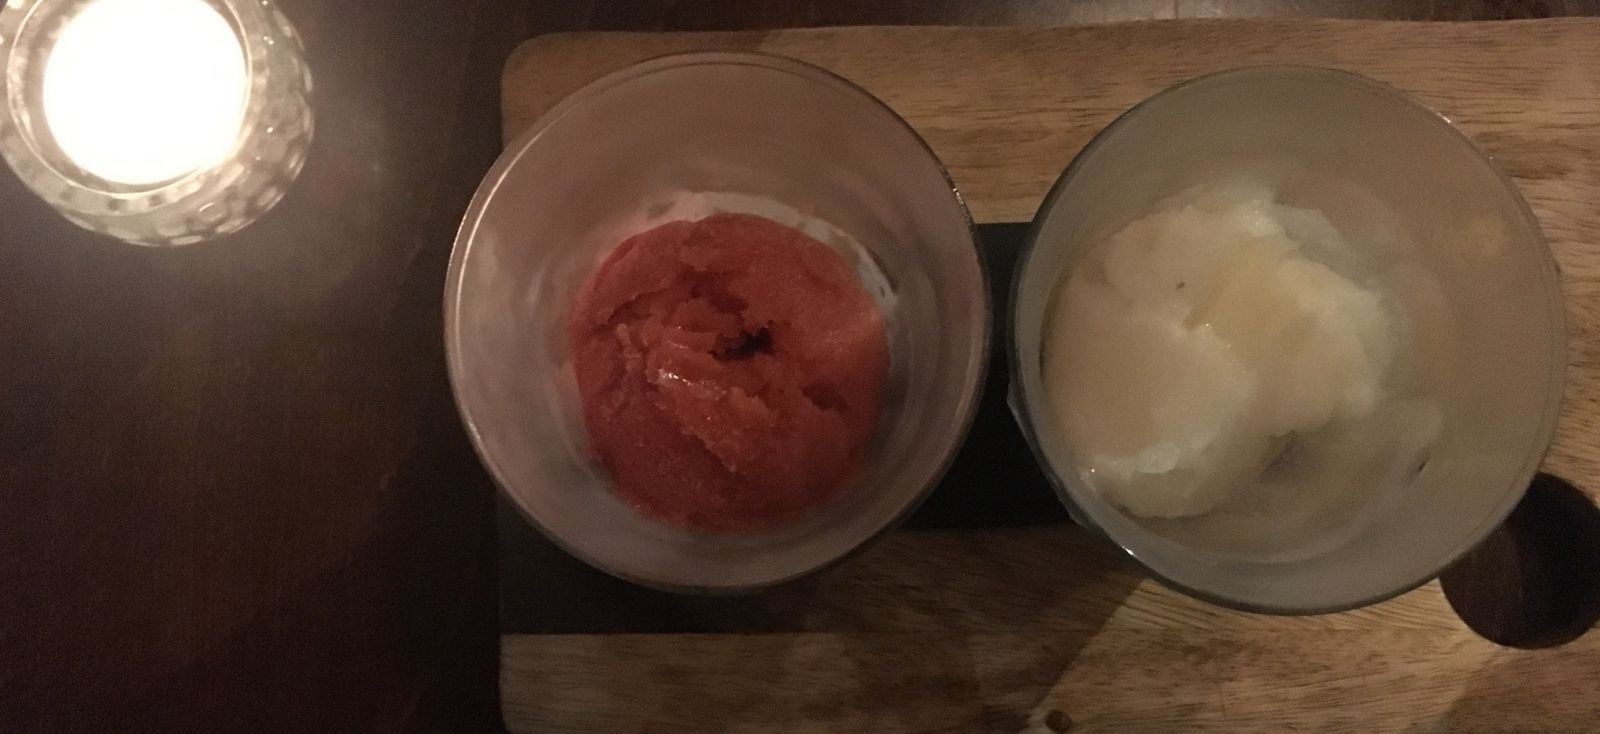 The Ox, Clifton - Raspberry and Lemon and mint sorbet